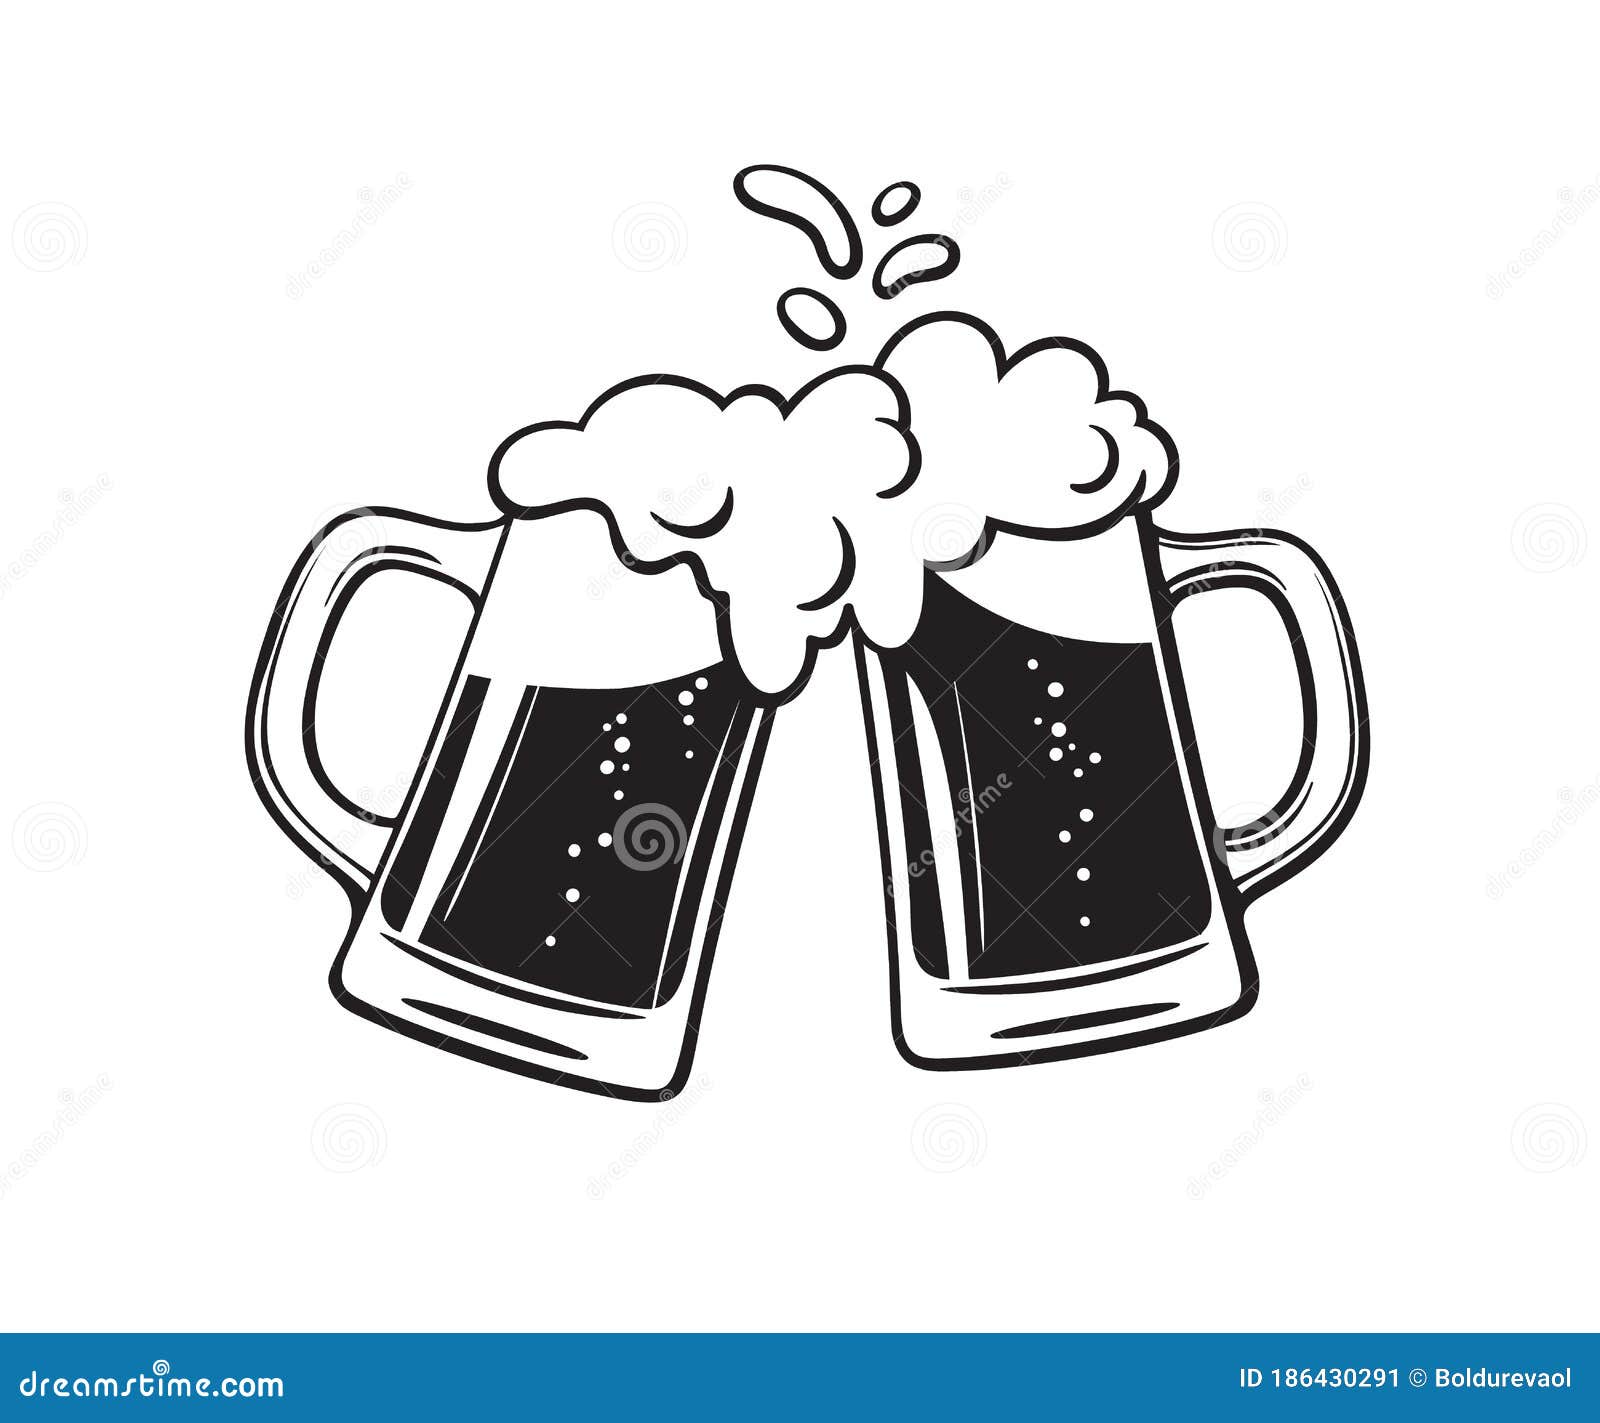 two toasting beer mugs, cheers. clinking glass tankards full of beer and splashed foam. black and white